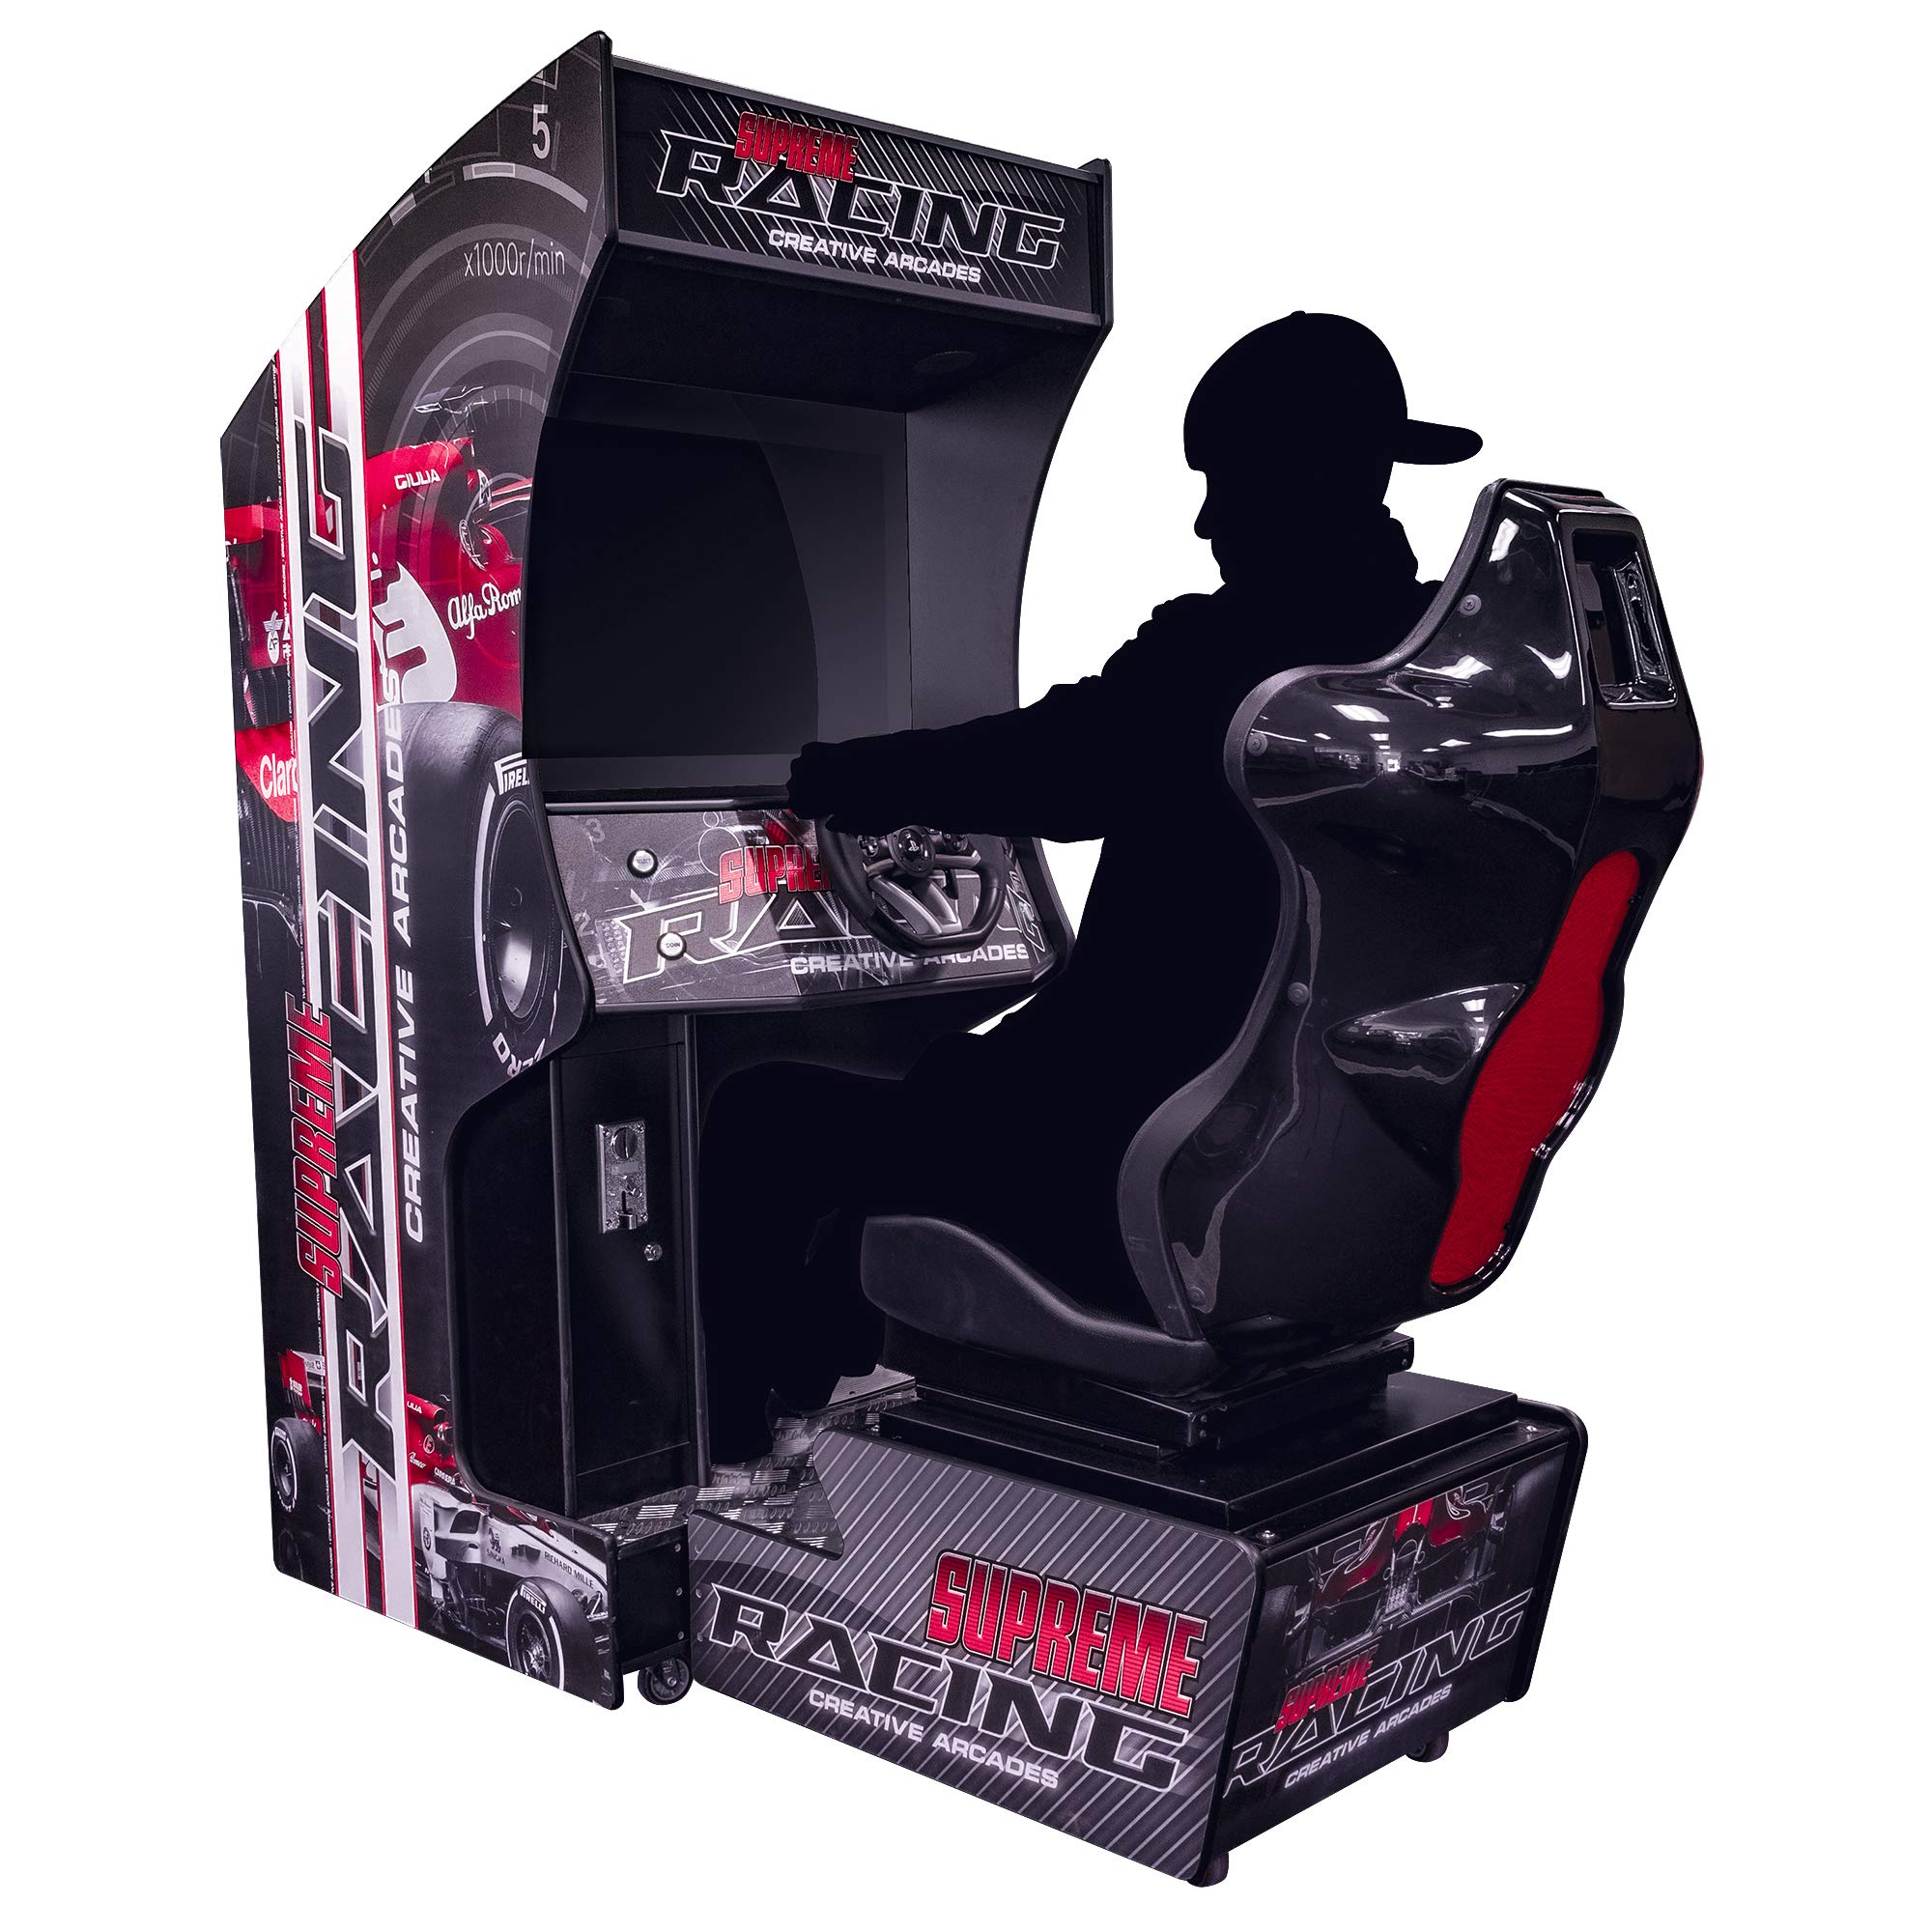 Creative Arcades Full Size Commercial Grade Seated Racing Arcade Machine | 107 Racing Games | 32